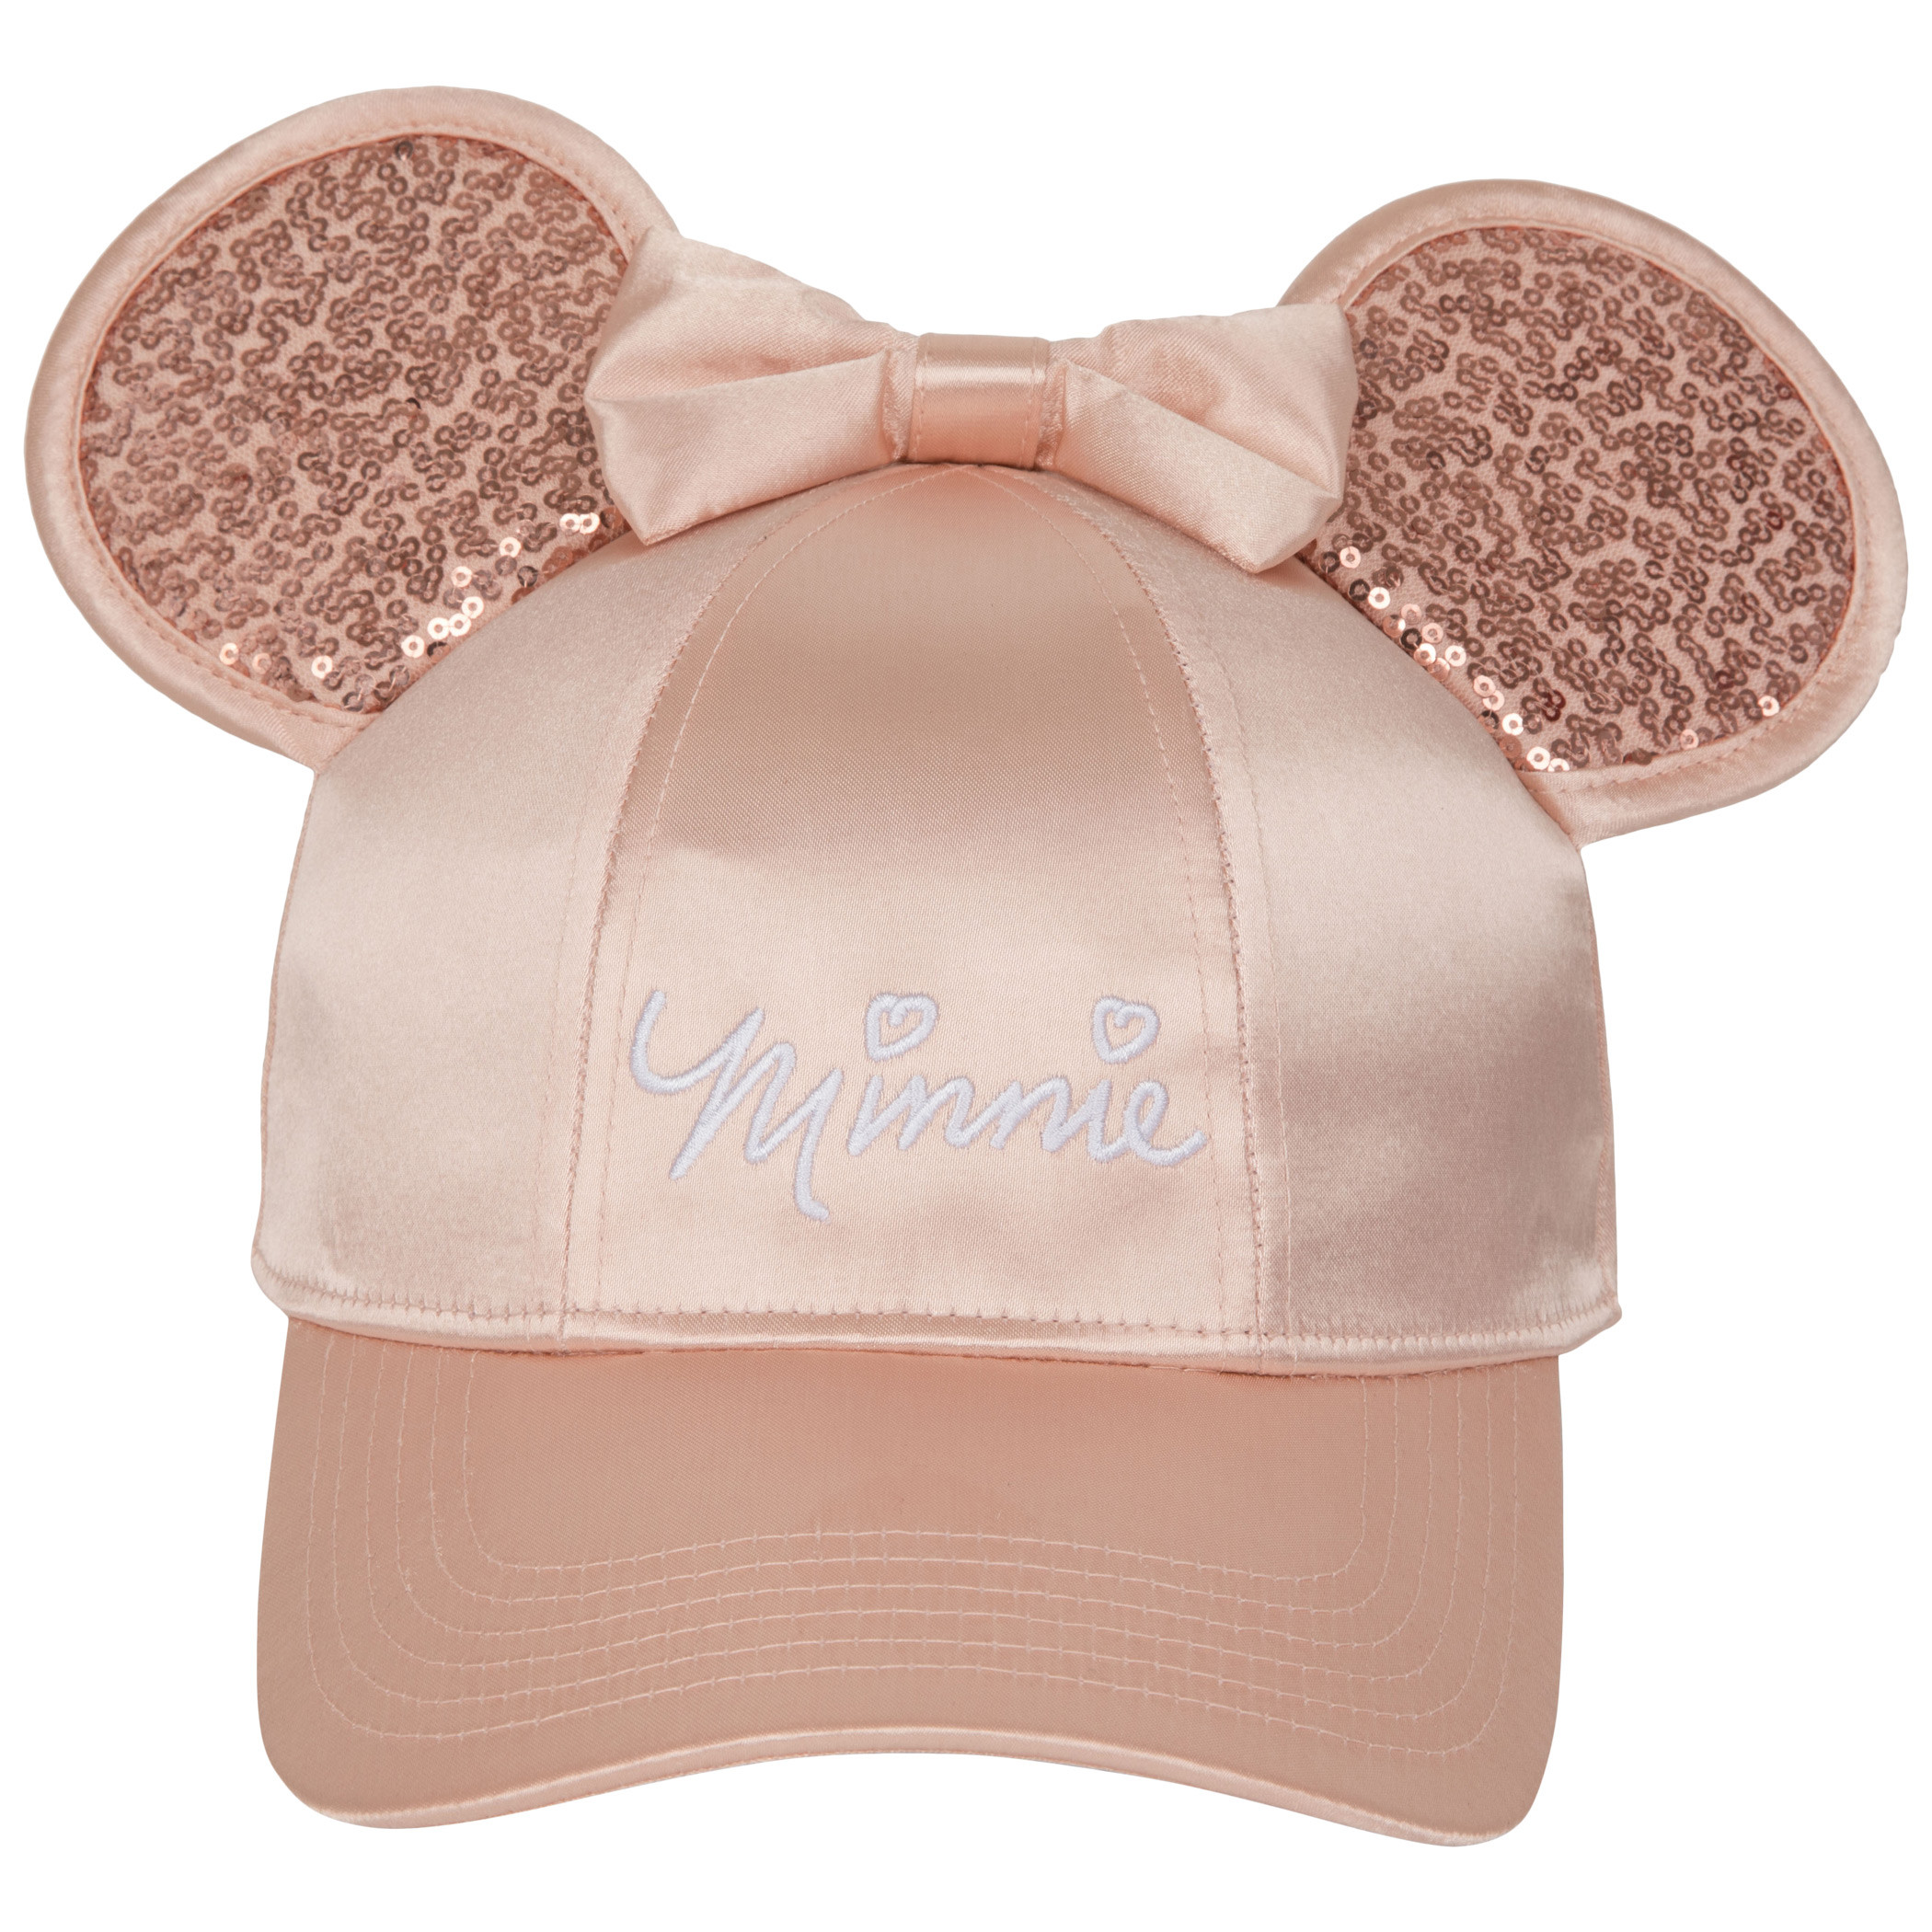 Disney Minnie Mouse Signature Glitter Rose Gold Cap with 3D Ears and Bow